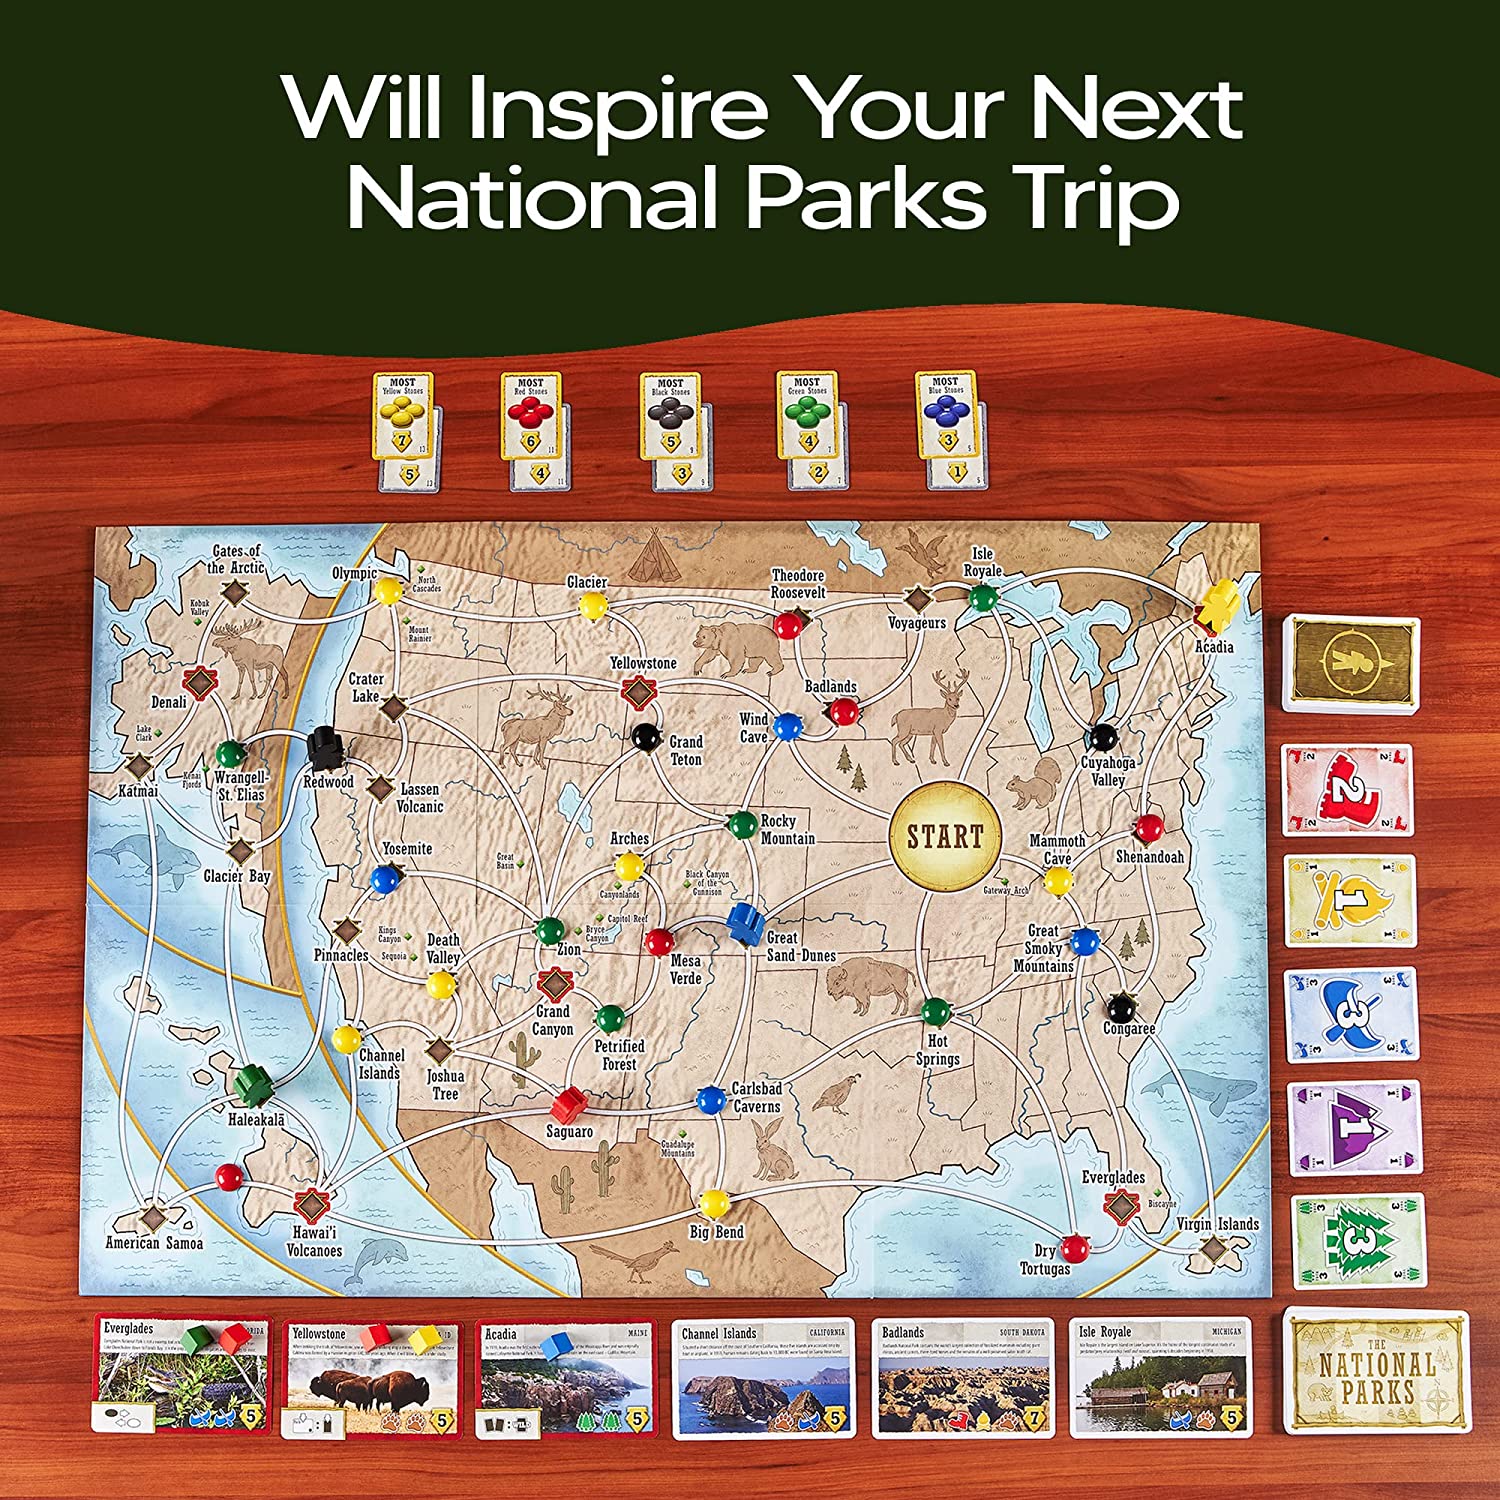 Trekking The National Parks Game